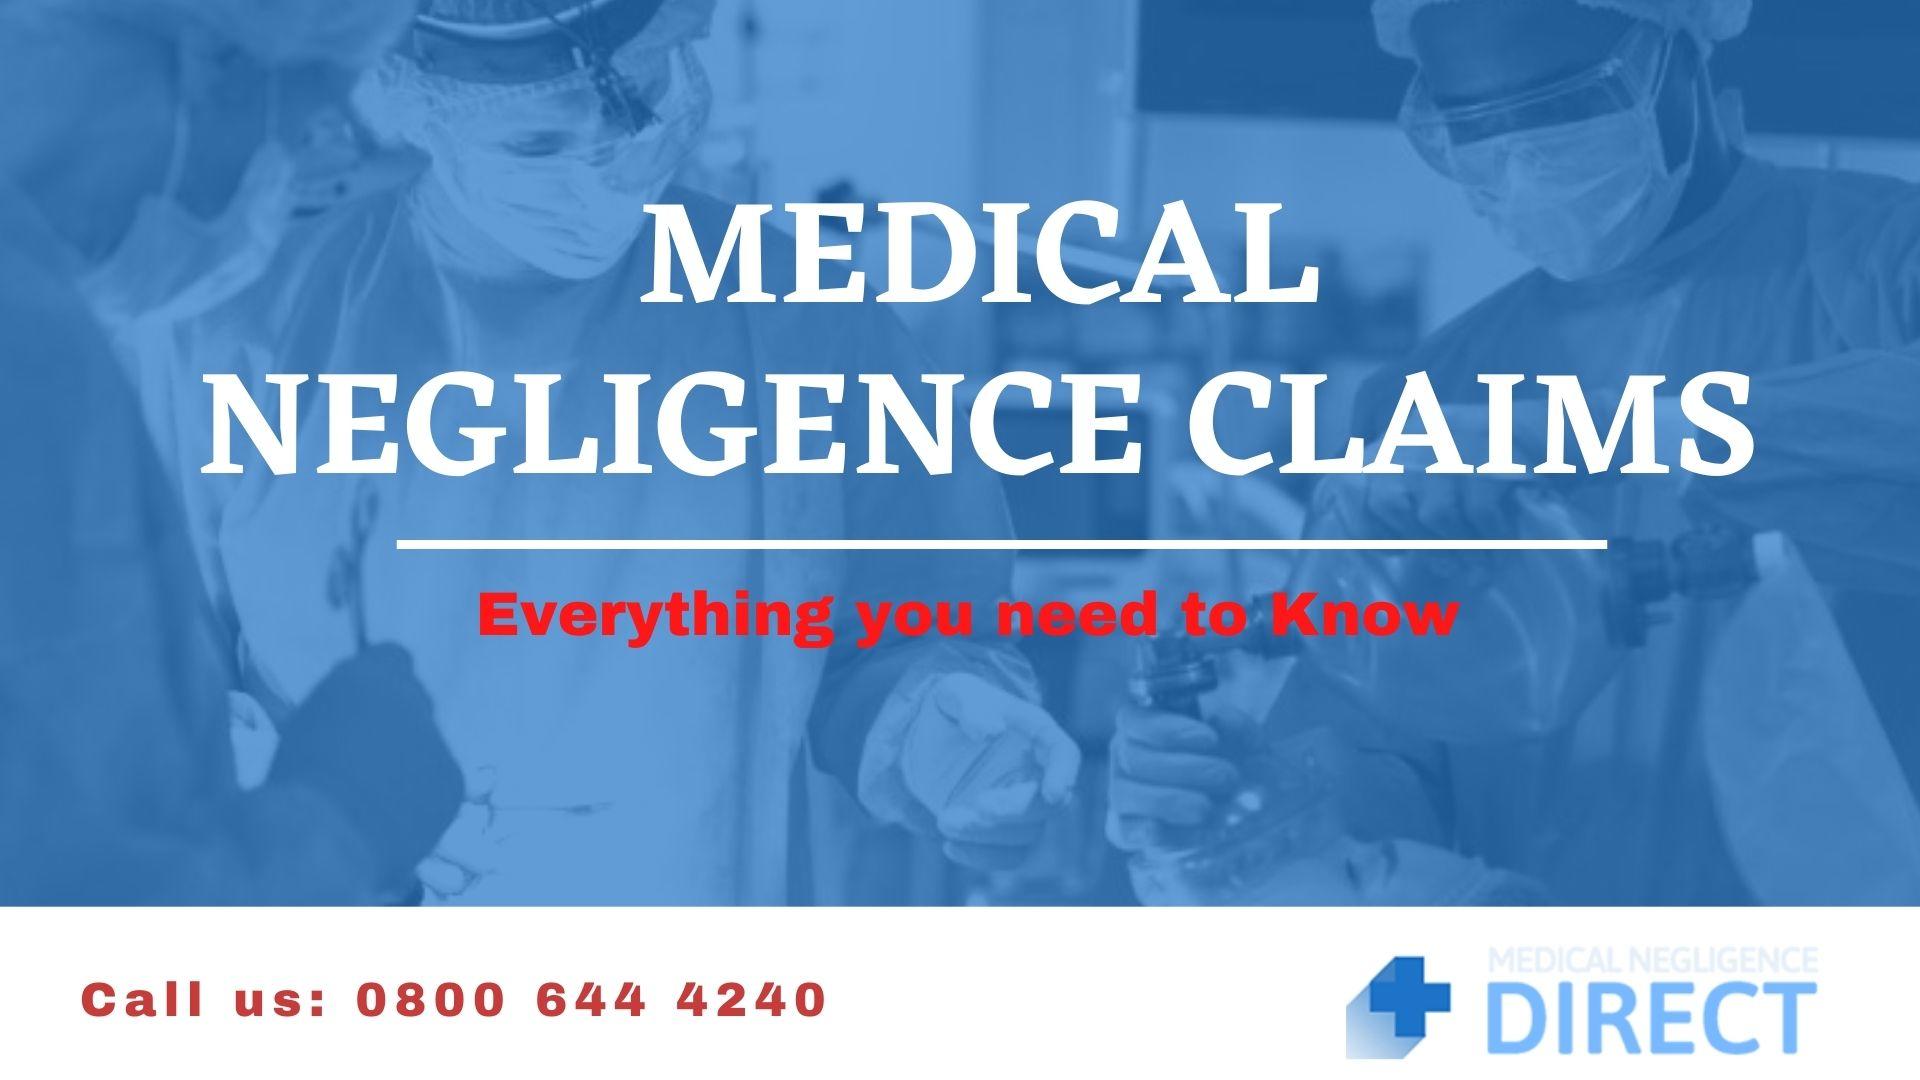 Image - If your family member have been injured or harmed due to medical mistake in Hospital by healthcare. Contact u...